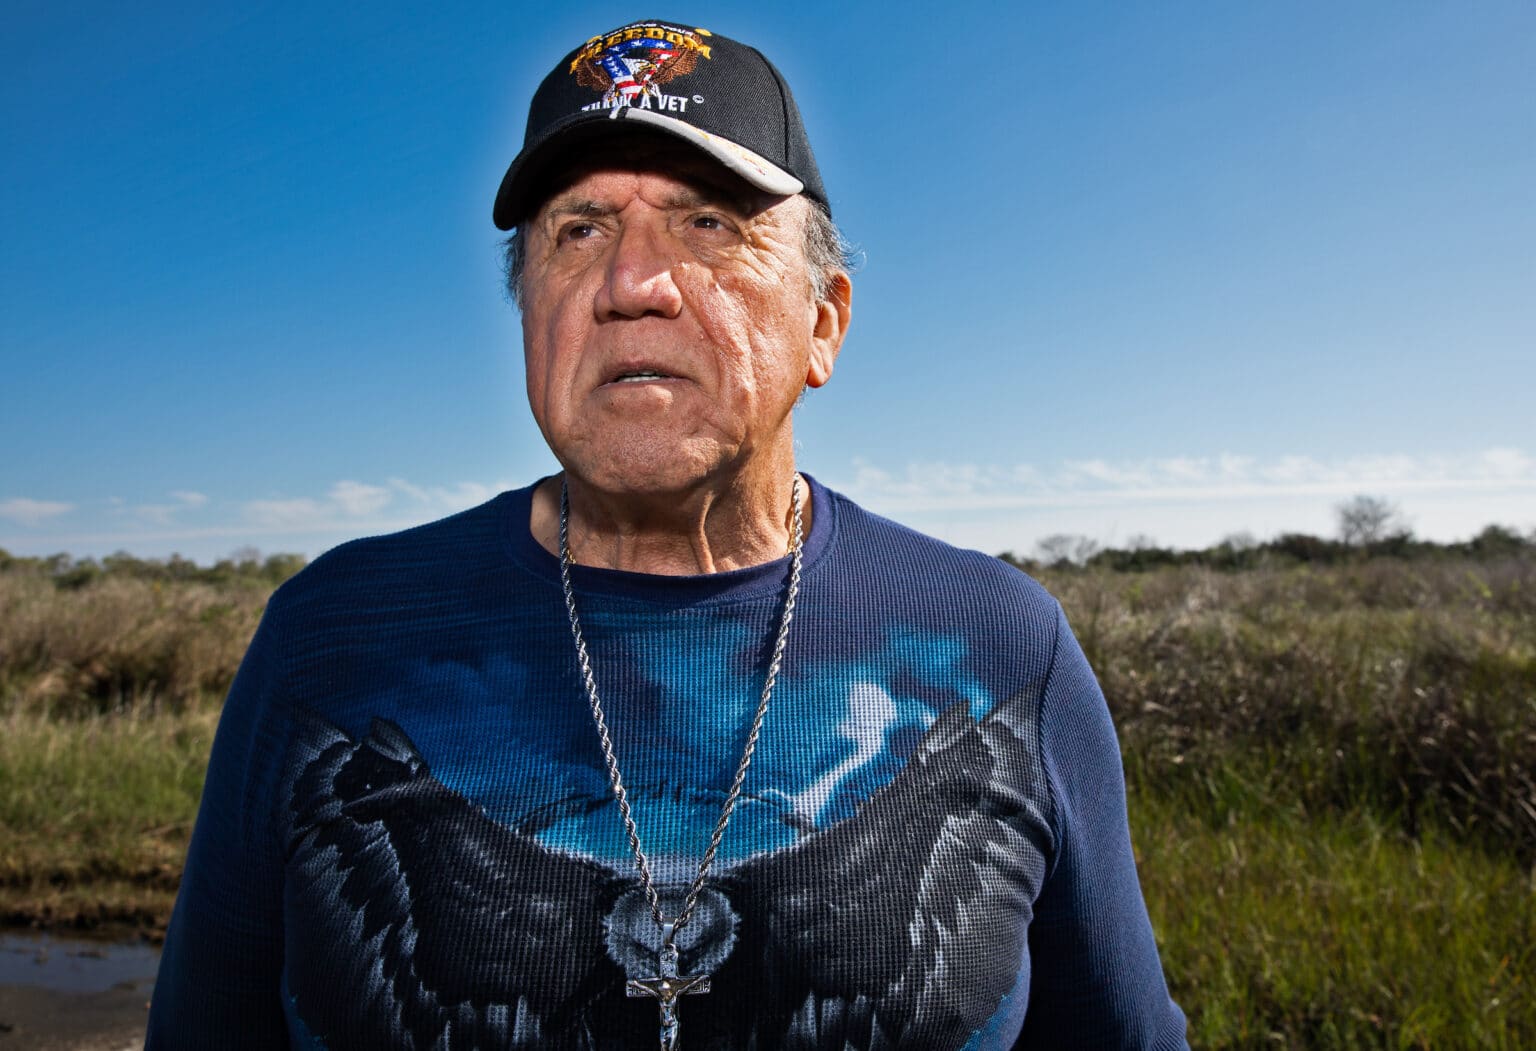 An older man in a baseball cap and blue shirt stands in a marsh and looks away